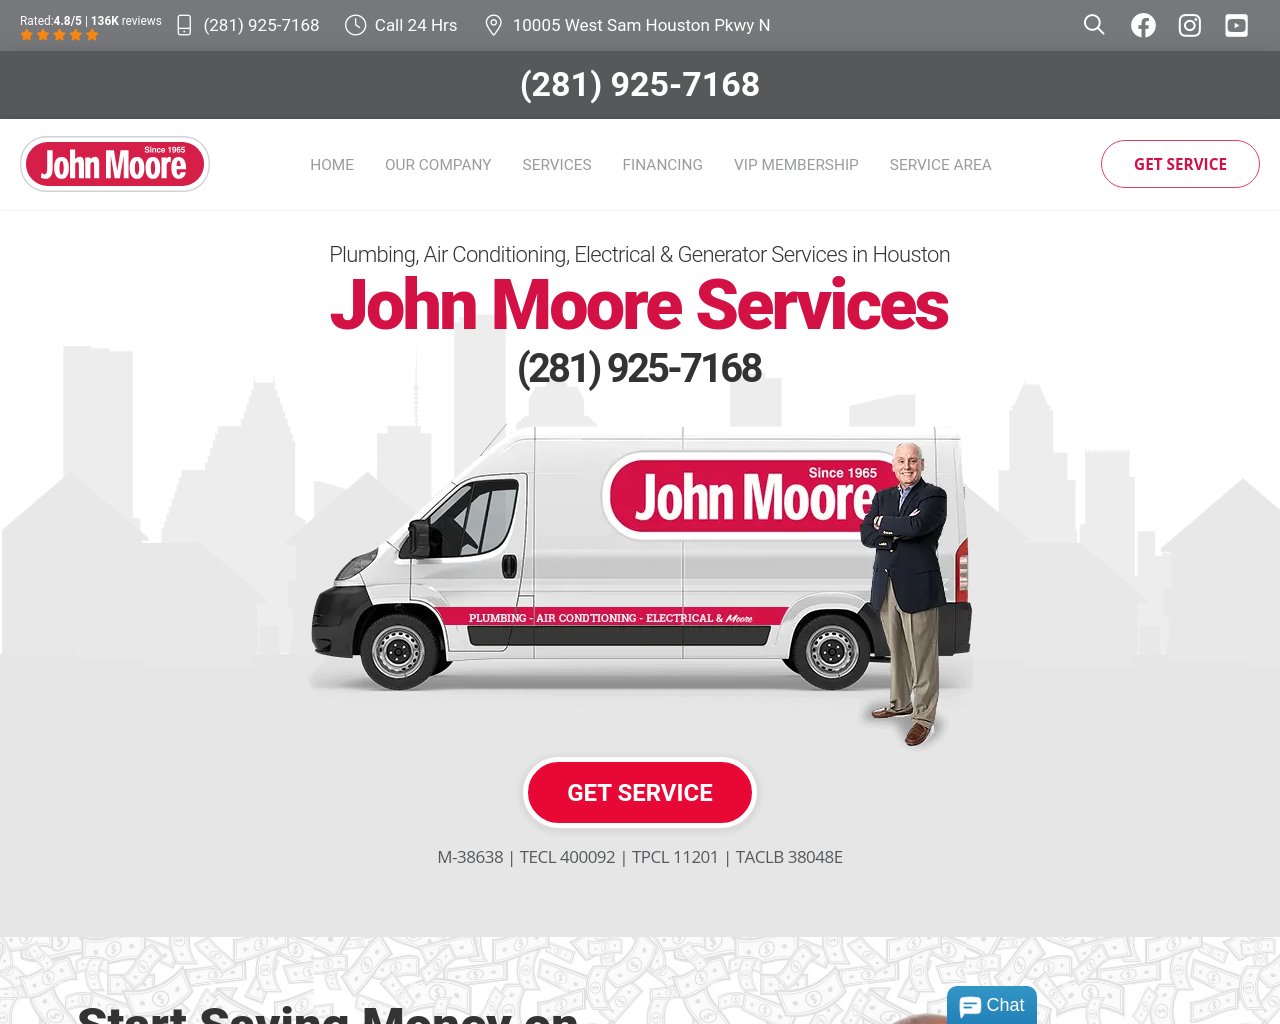 johnmooreservices.com